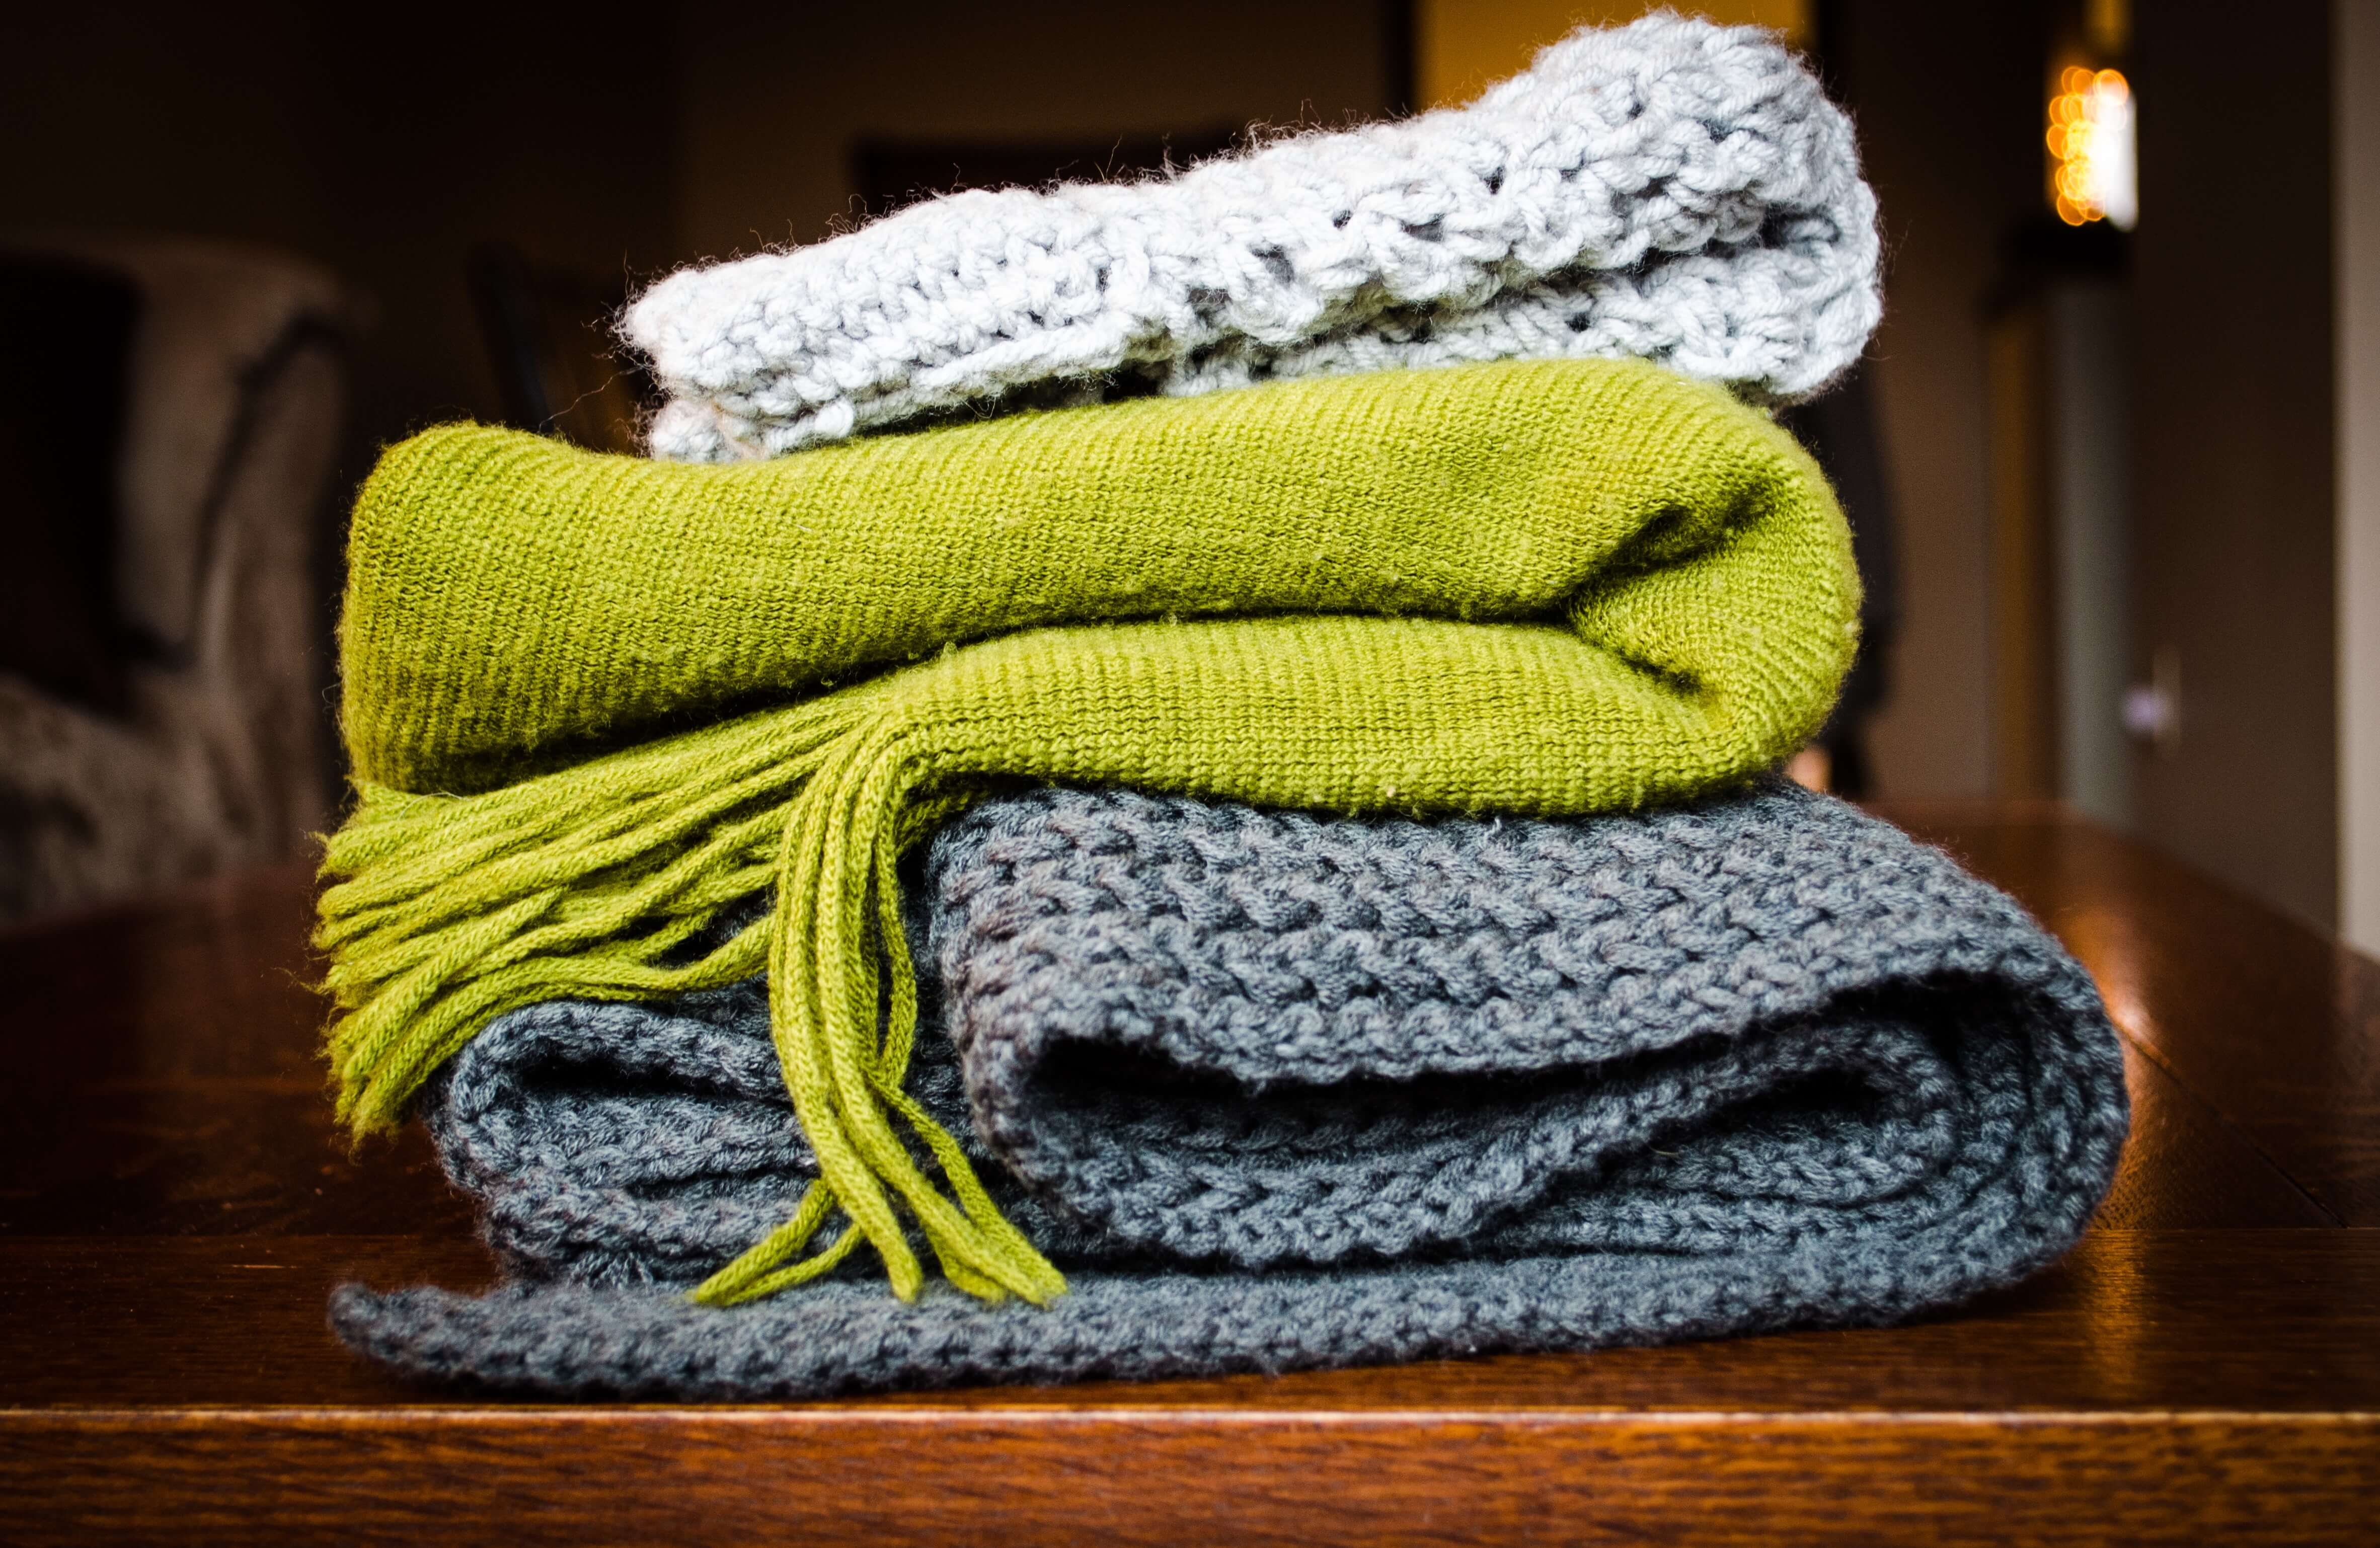 Three knitted scarves folded up.